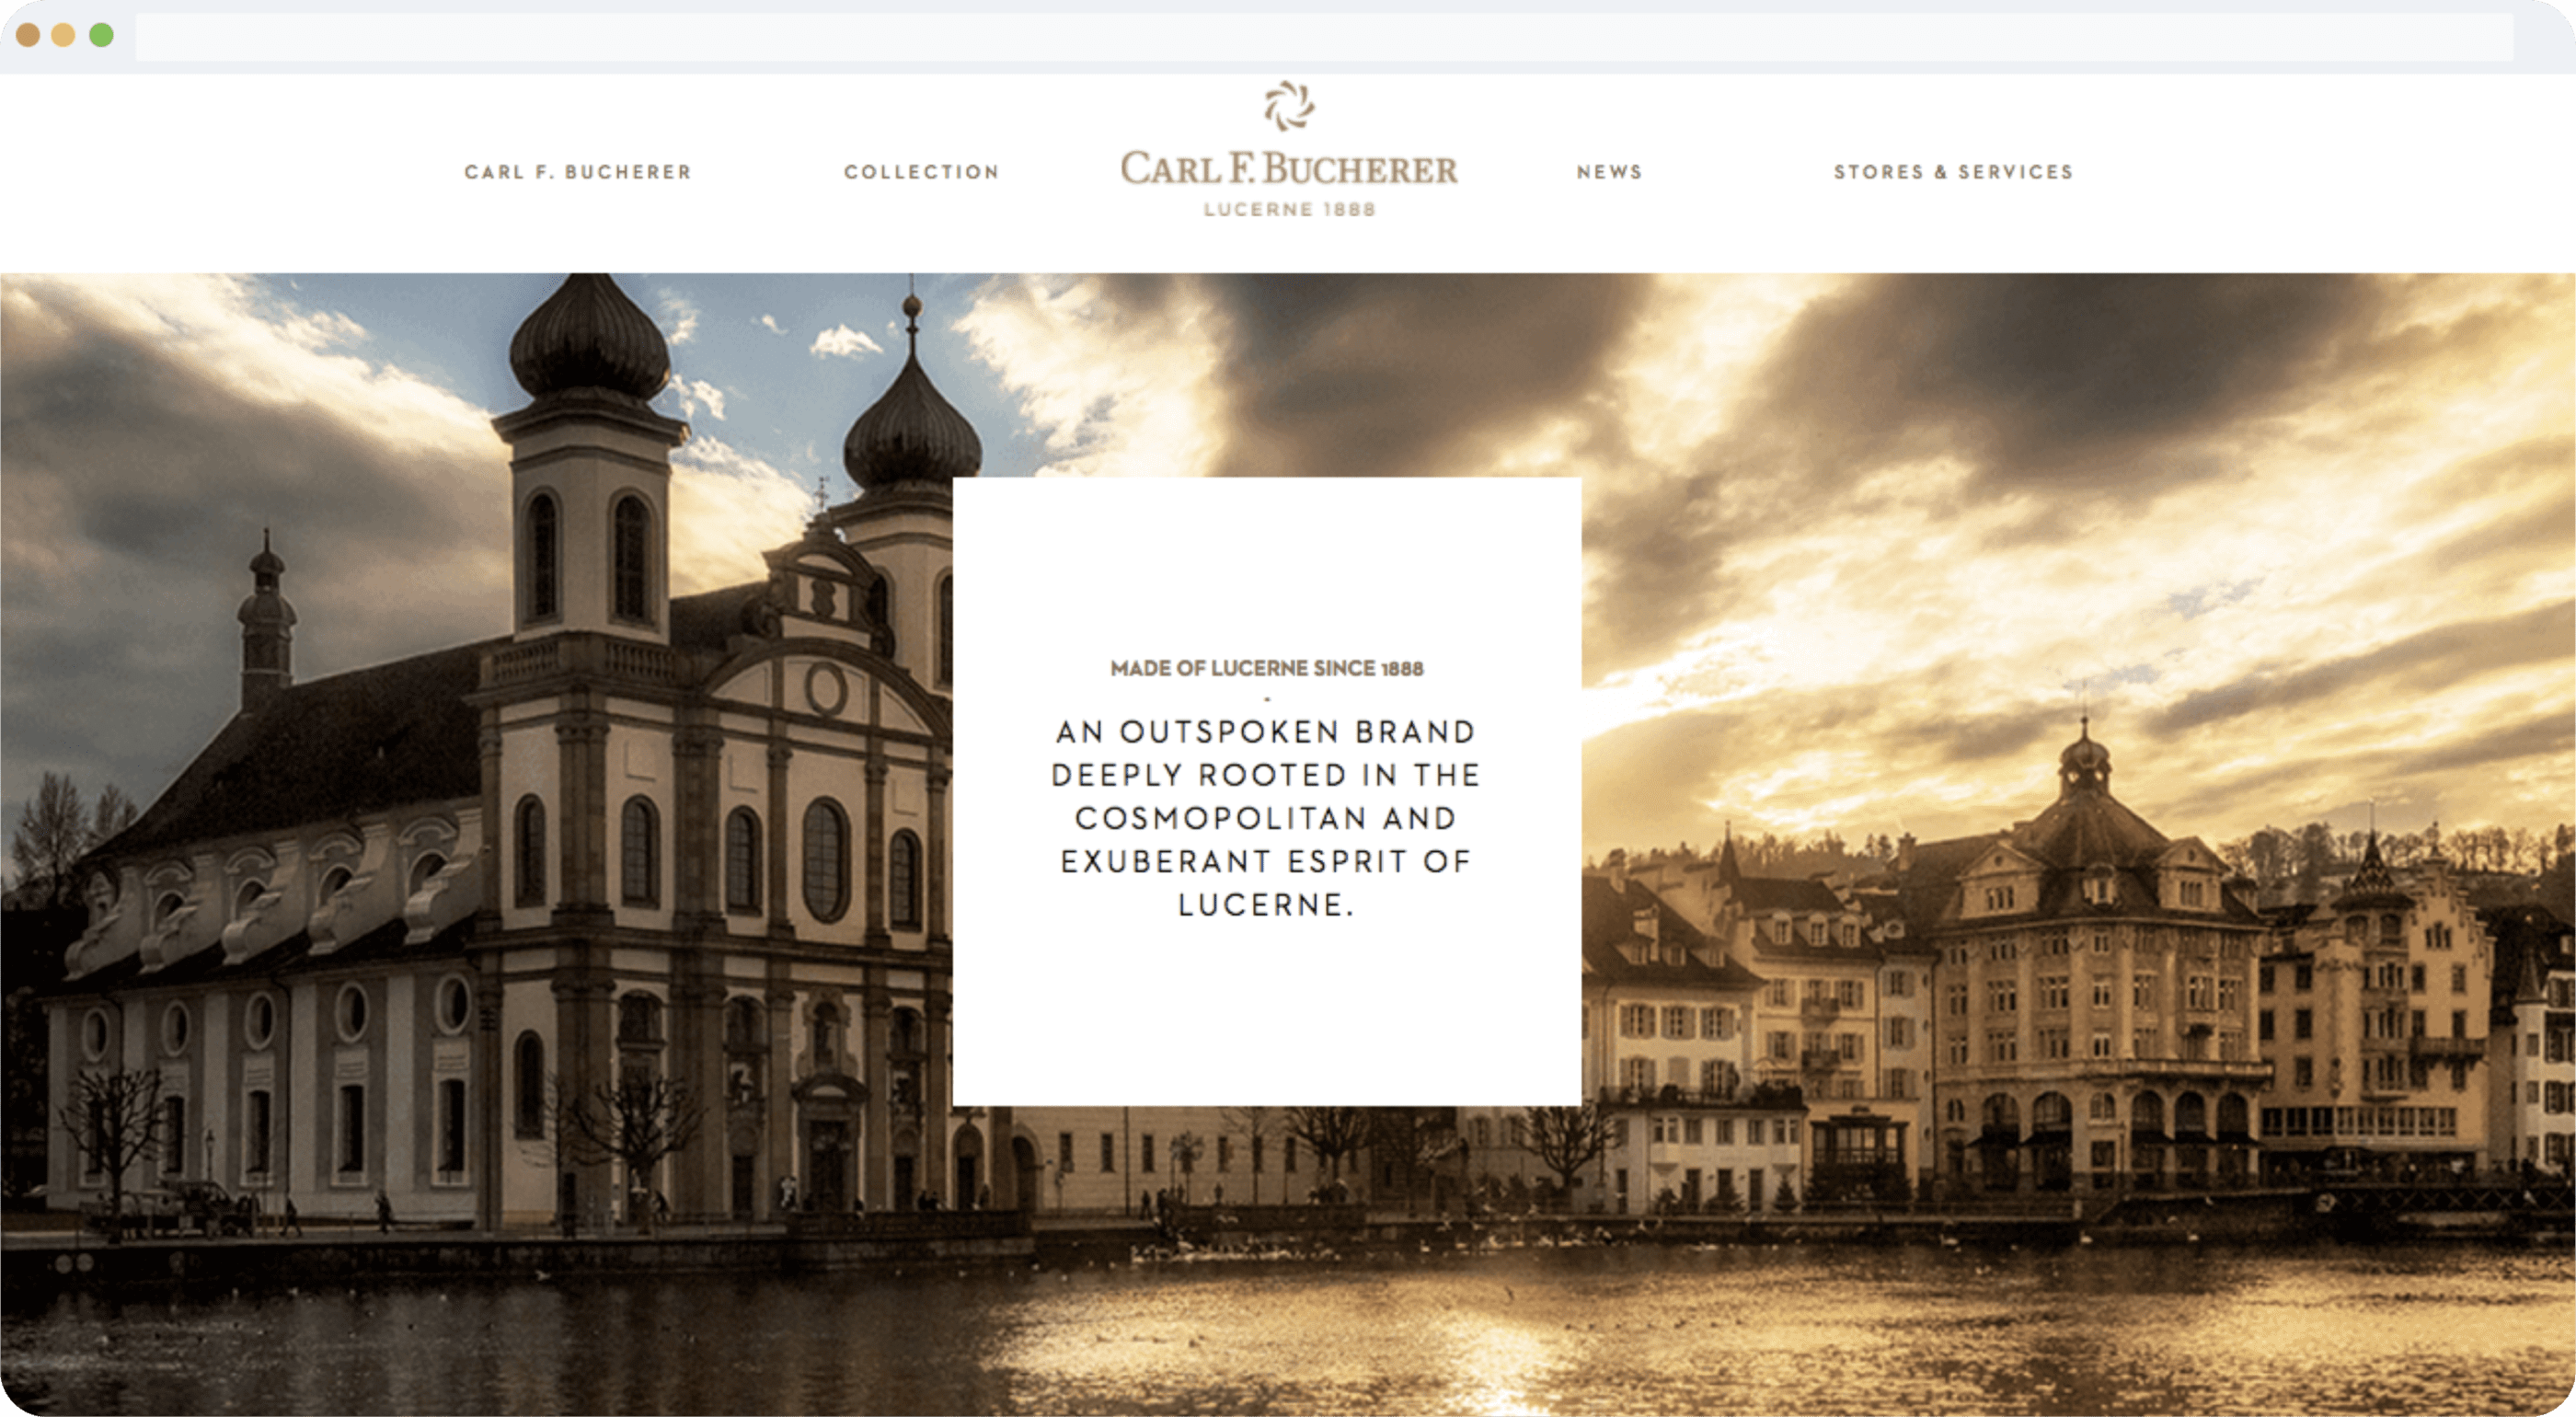 The Homepage of the revamped Carl F. Bucherer website